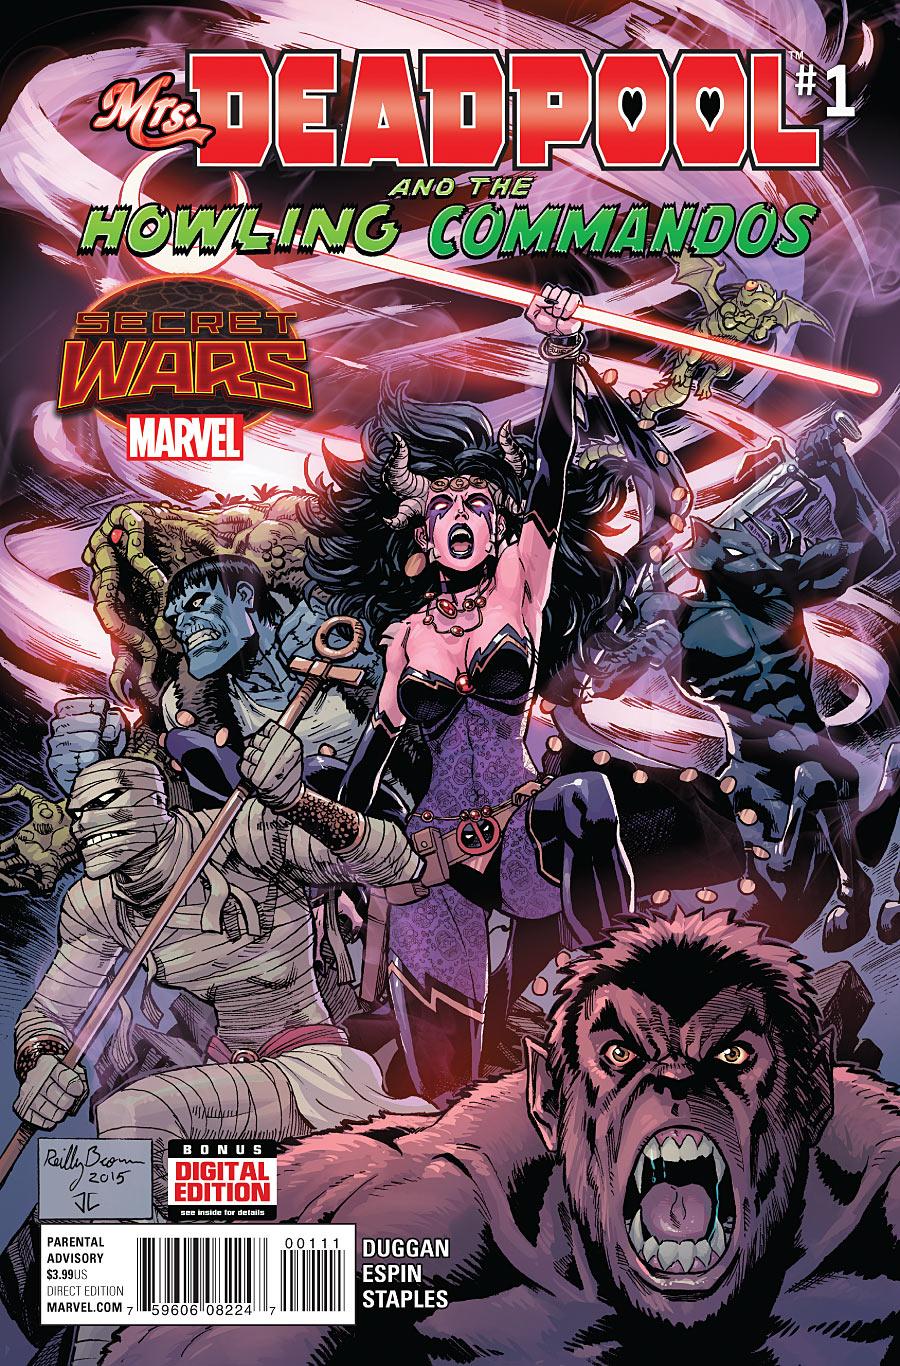 Mrs. Deadpool and the Howling Commandos Vol. 1 #1